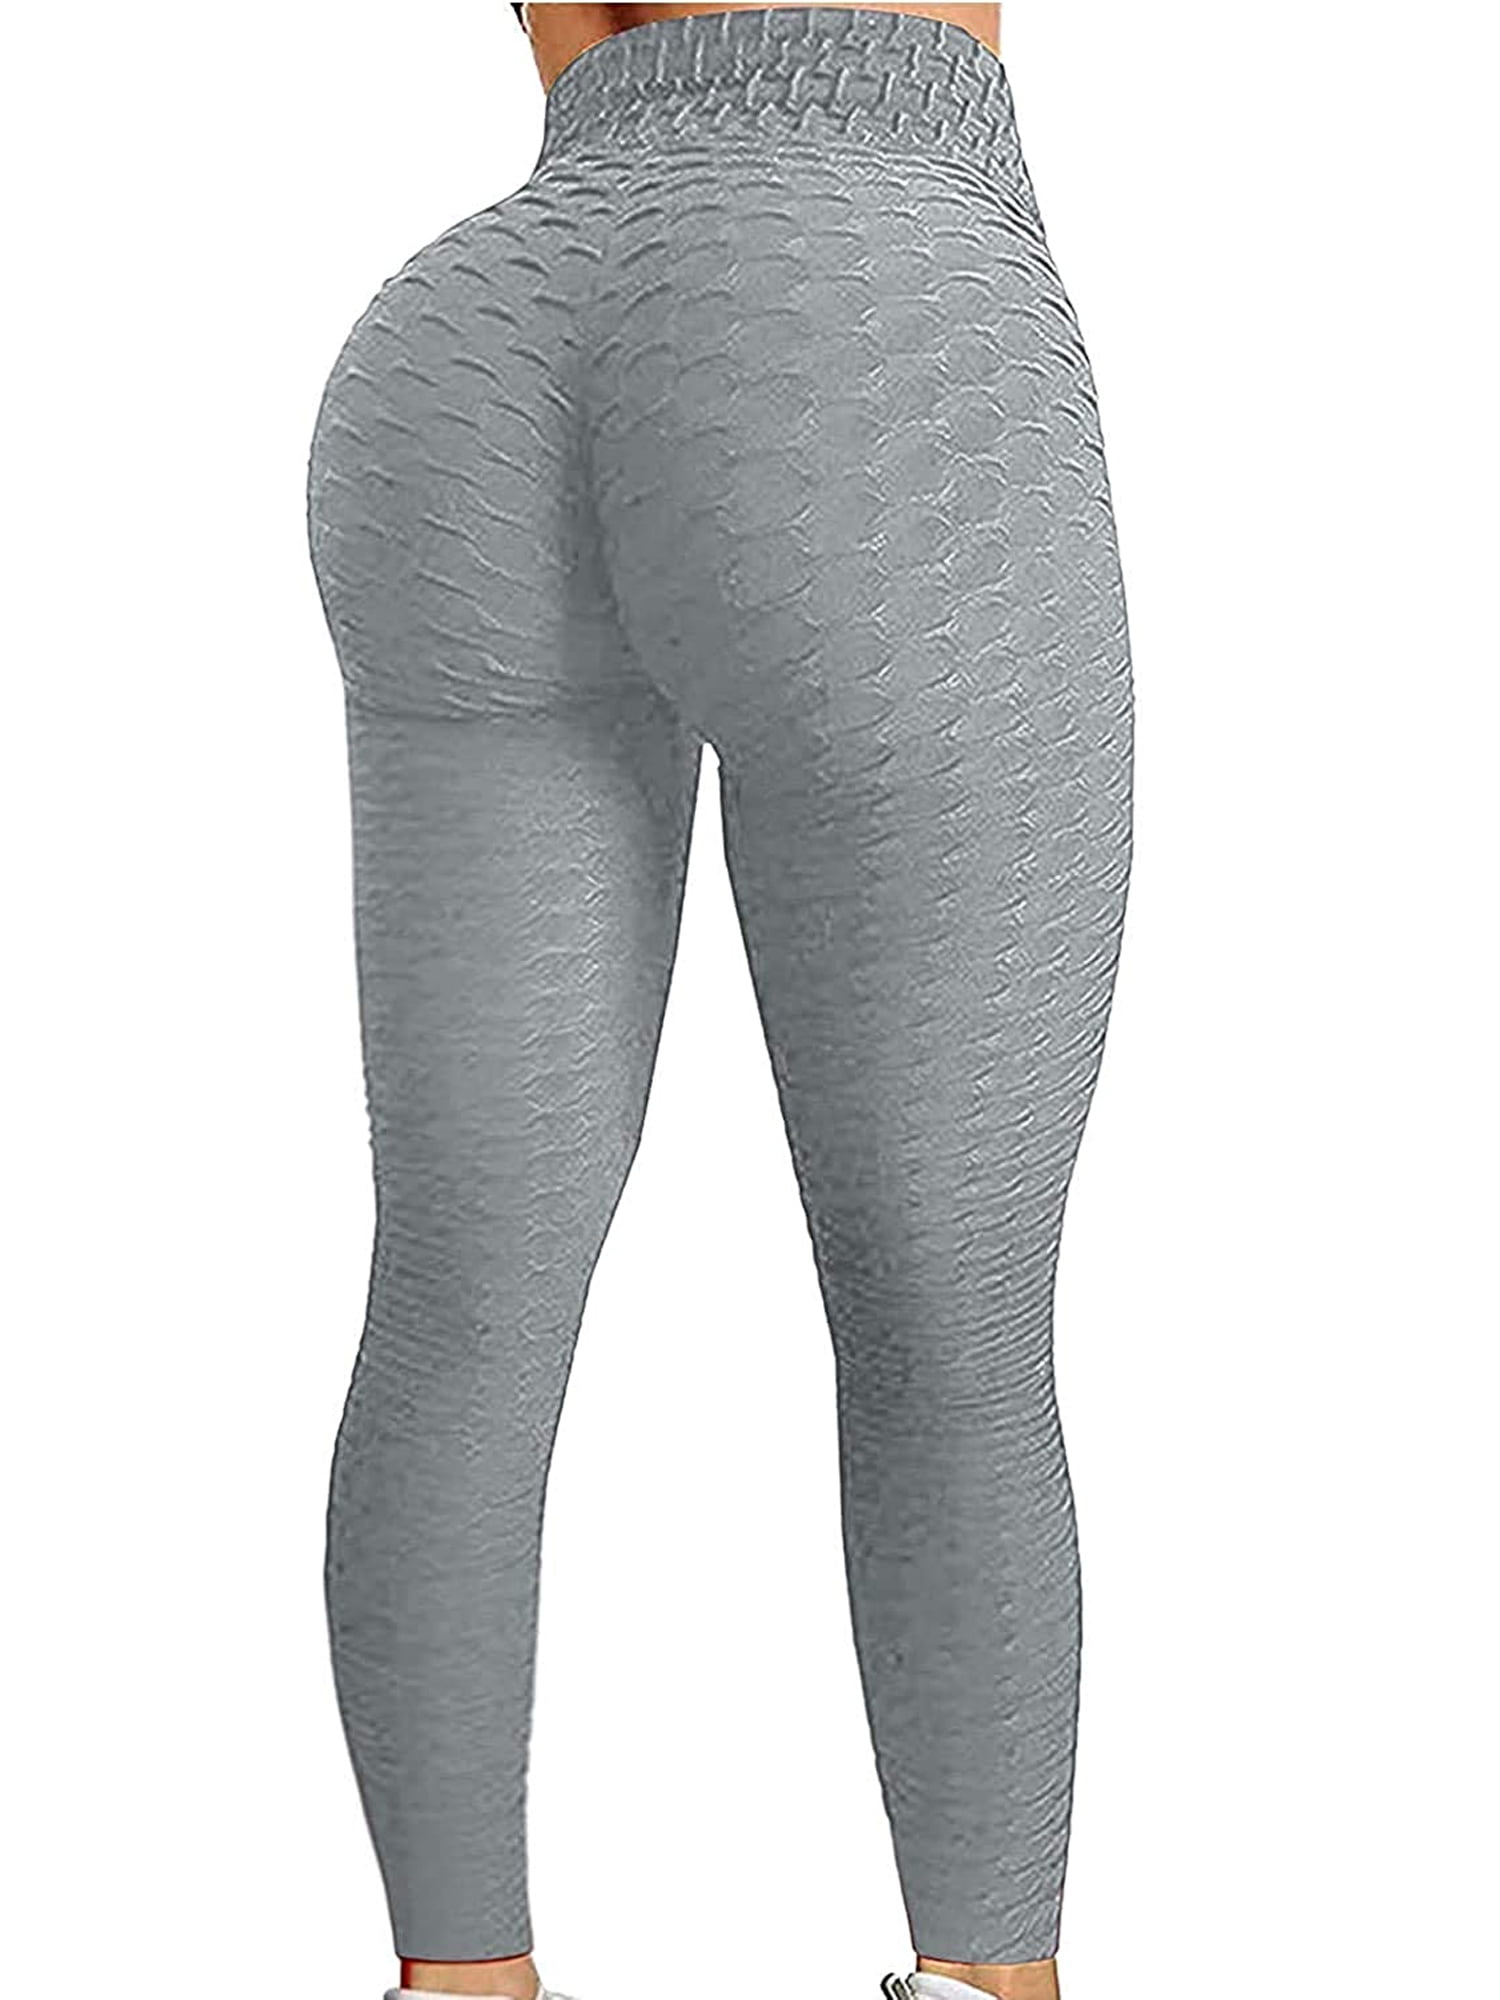 Womens Butt Lift Yoga Pants Sports Anti Cellulite Leggings Gym Ruched Trousers 